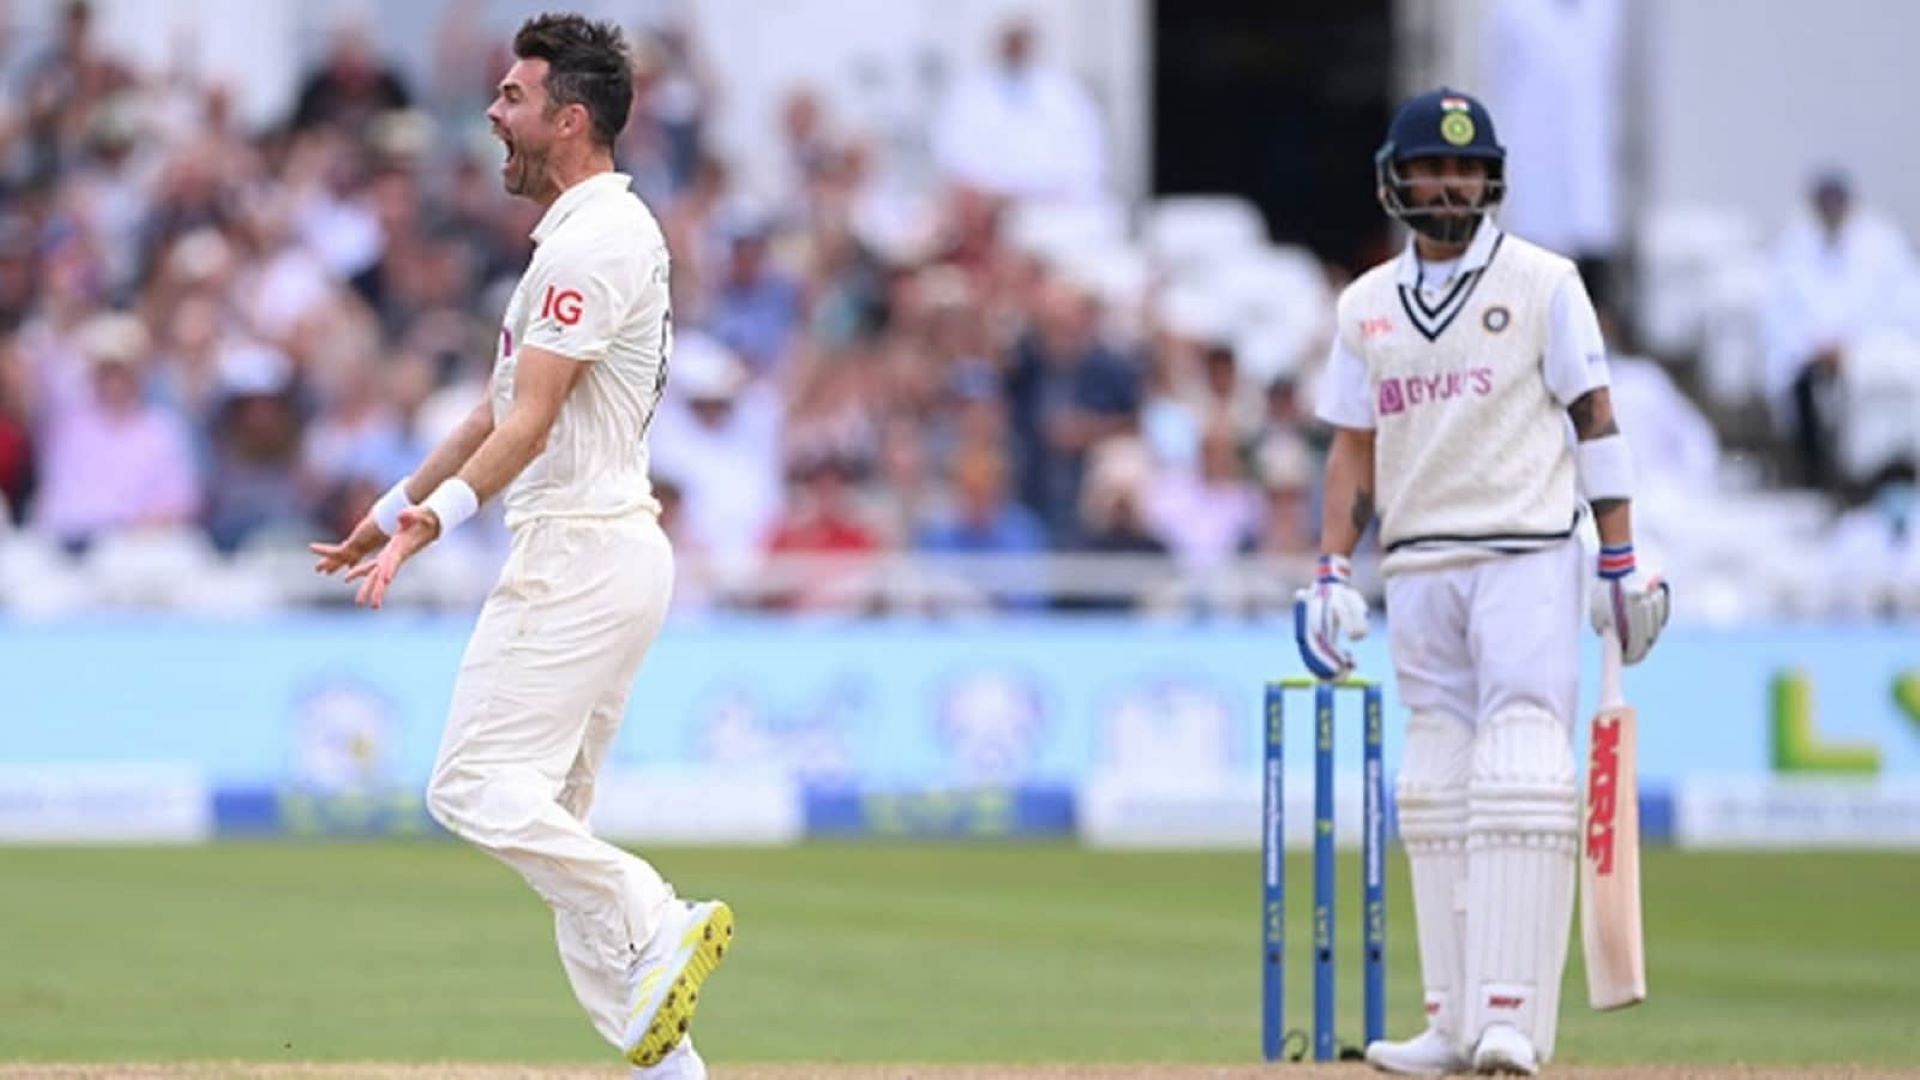 James Anderson has tormented India in his illustrious Test career.